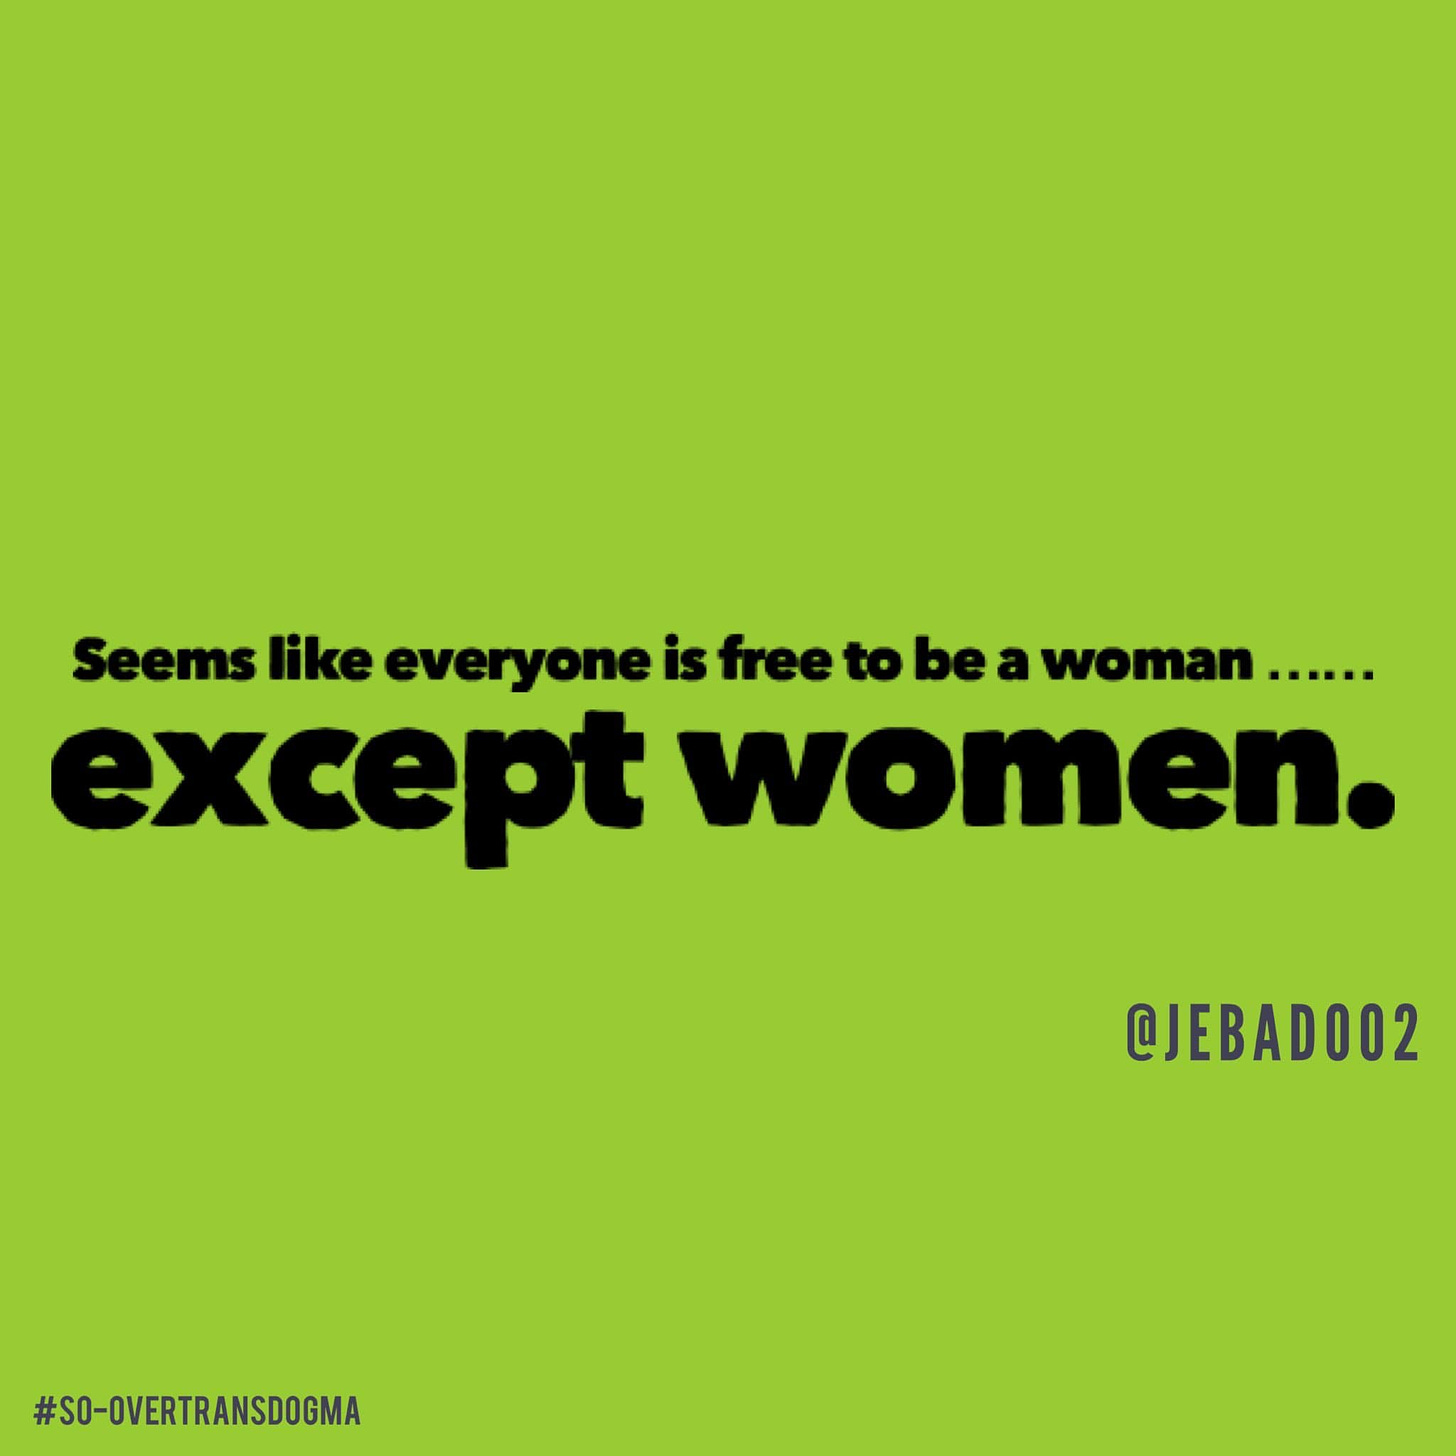 May be an image of text that says 'Seems like everyone is be a ..... except women. @JEBAD002 #SO-OVERTRANSDOGMA'